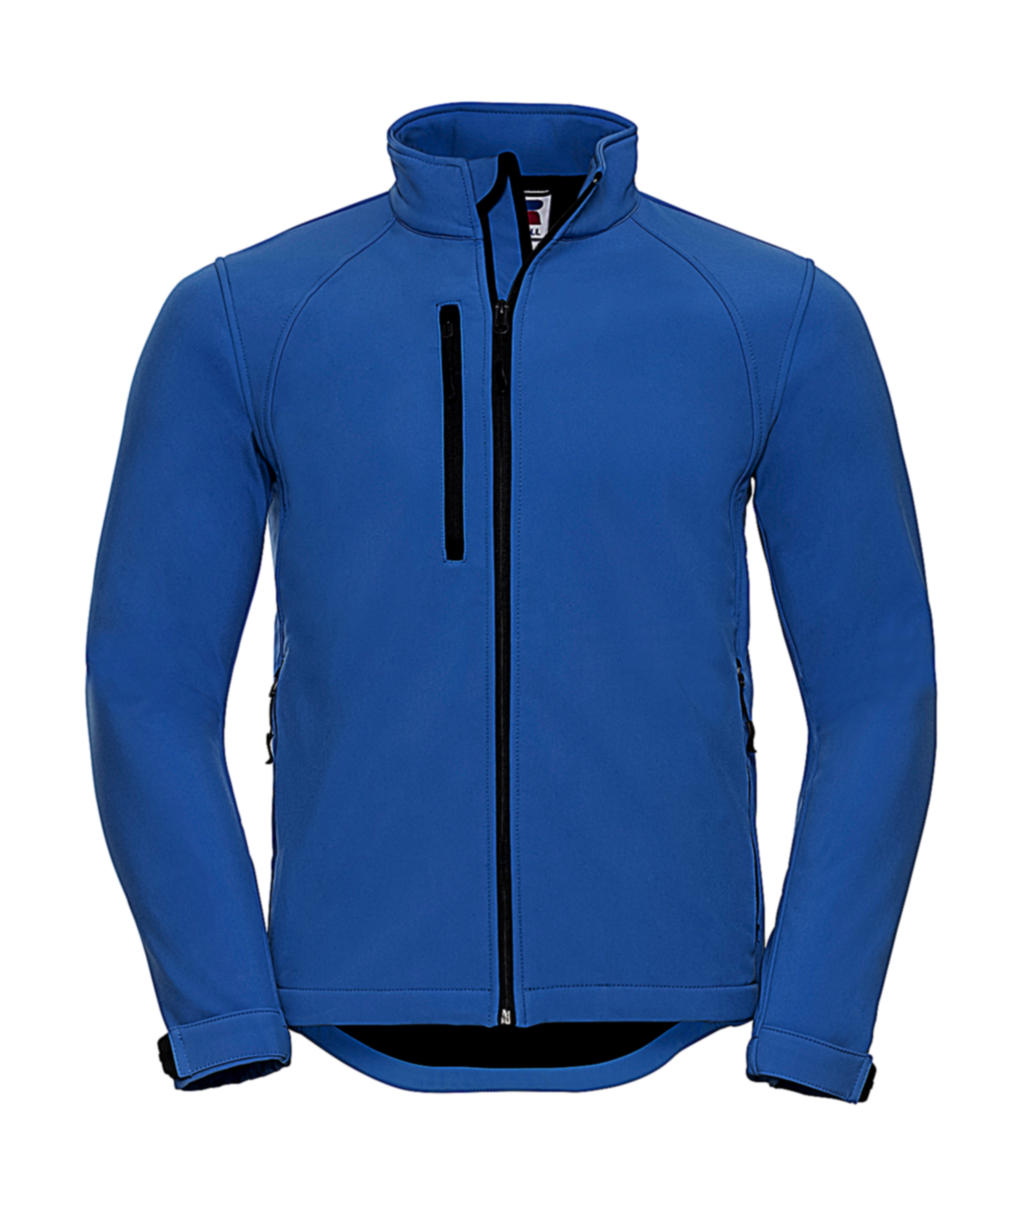 Russell europe - chaqueta softshell hombre - 438